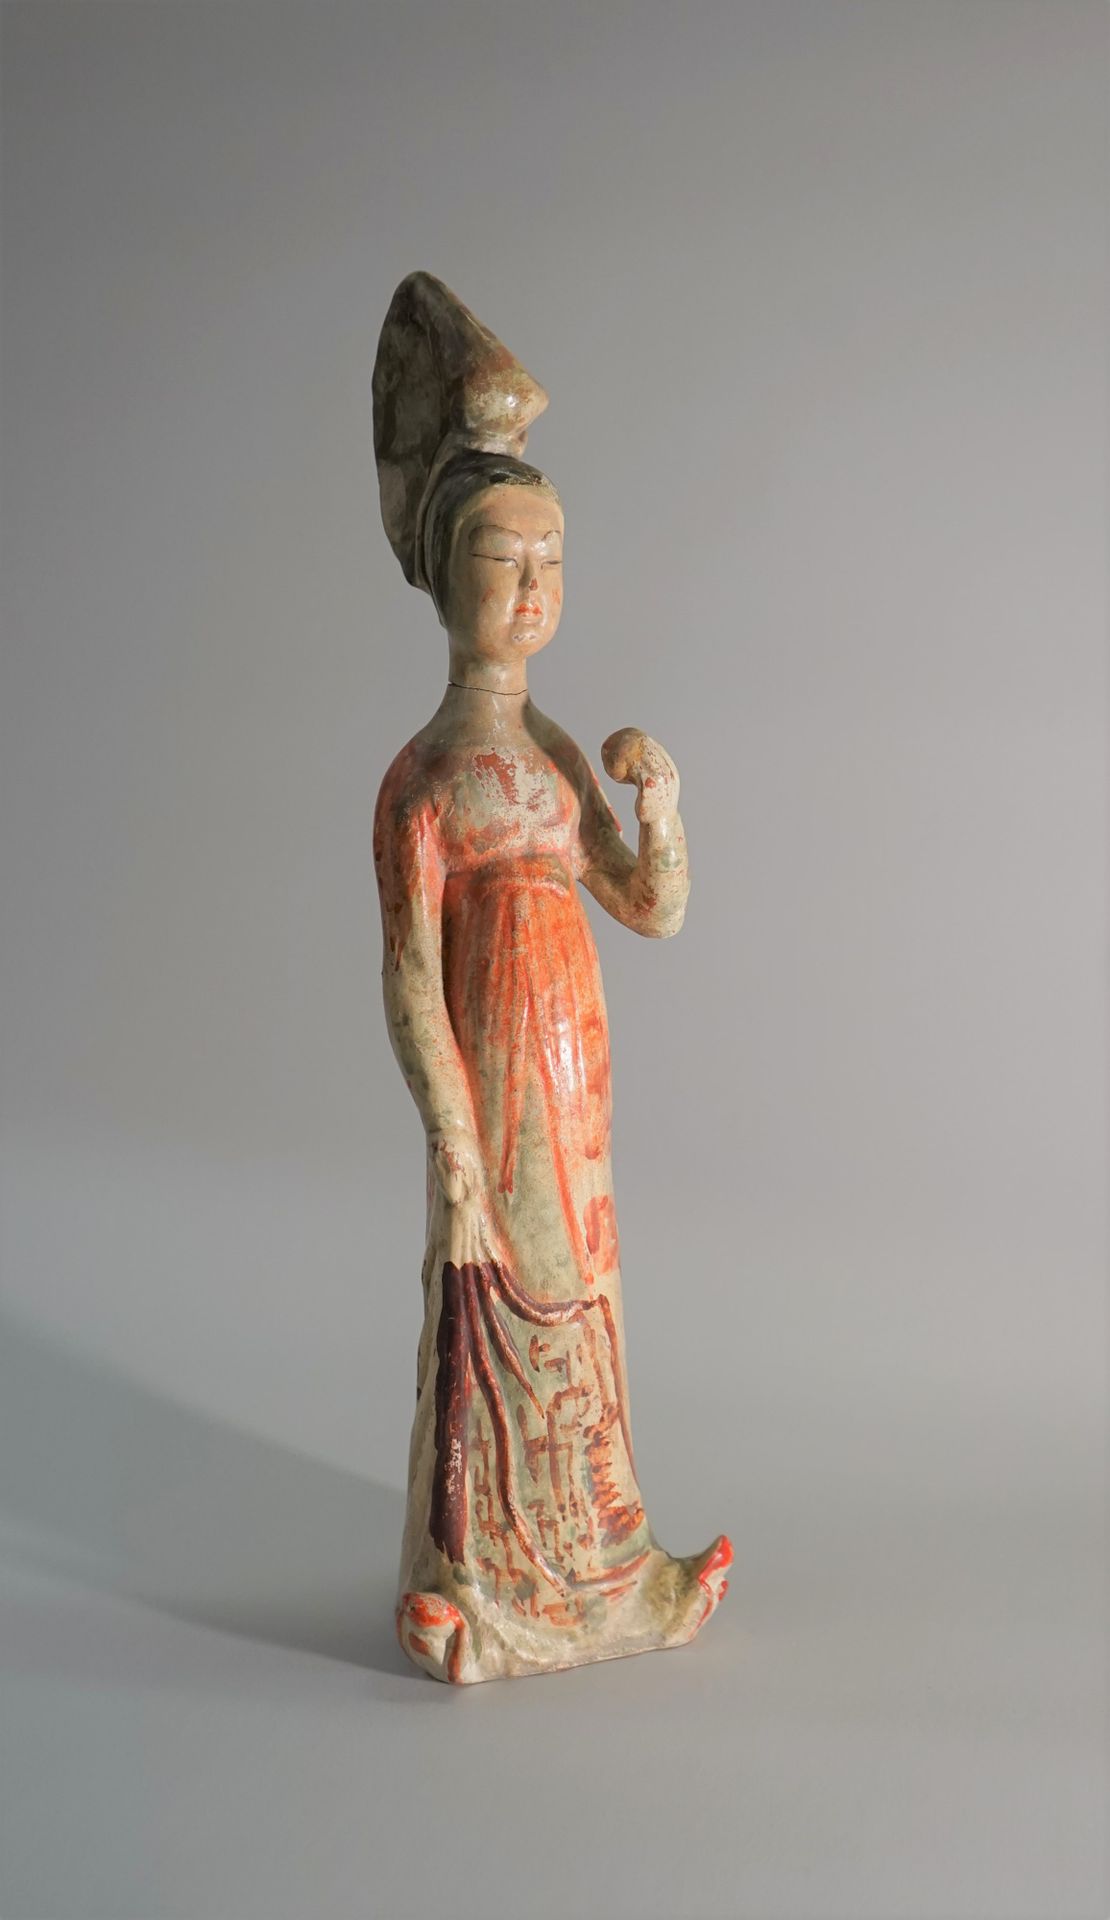 Null Polychrome ceramic court lady. Broken head glued on. Tang style.

34.5cm